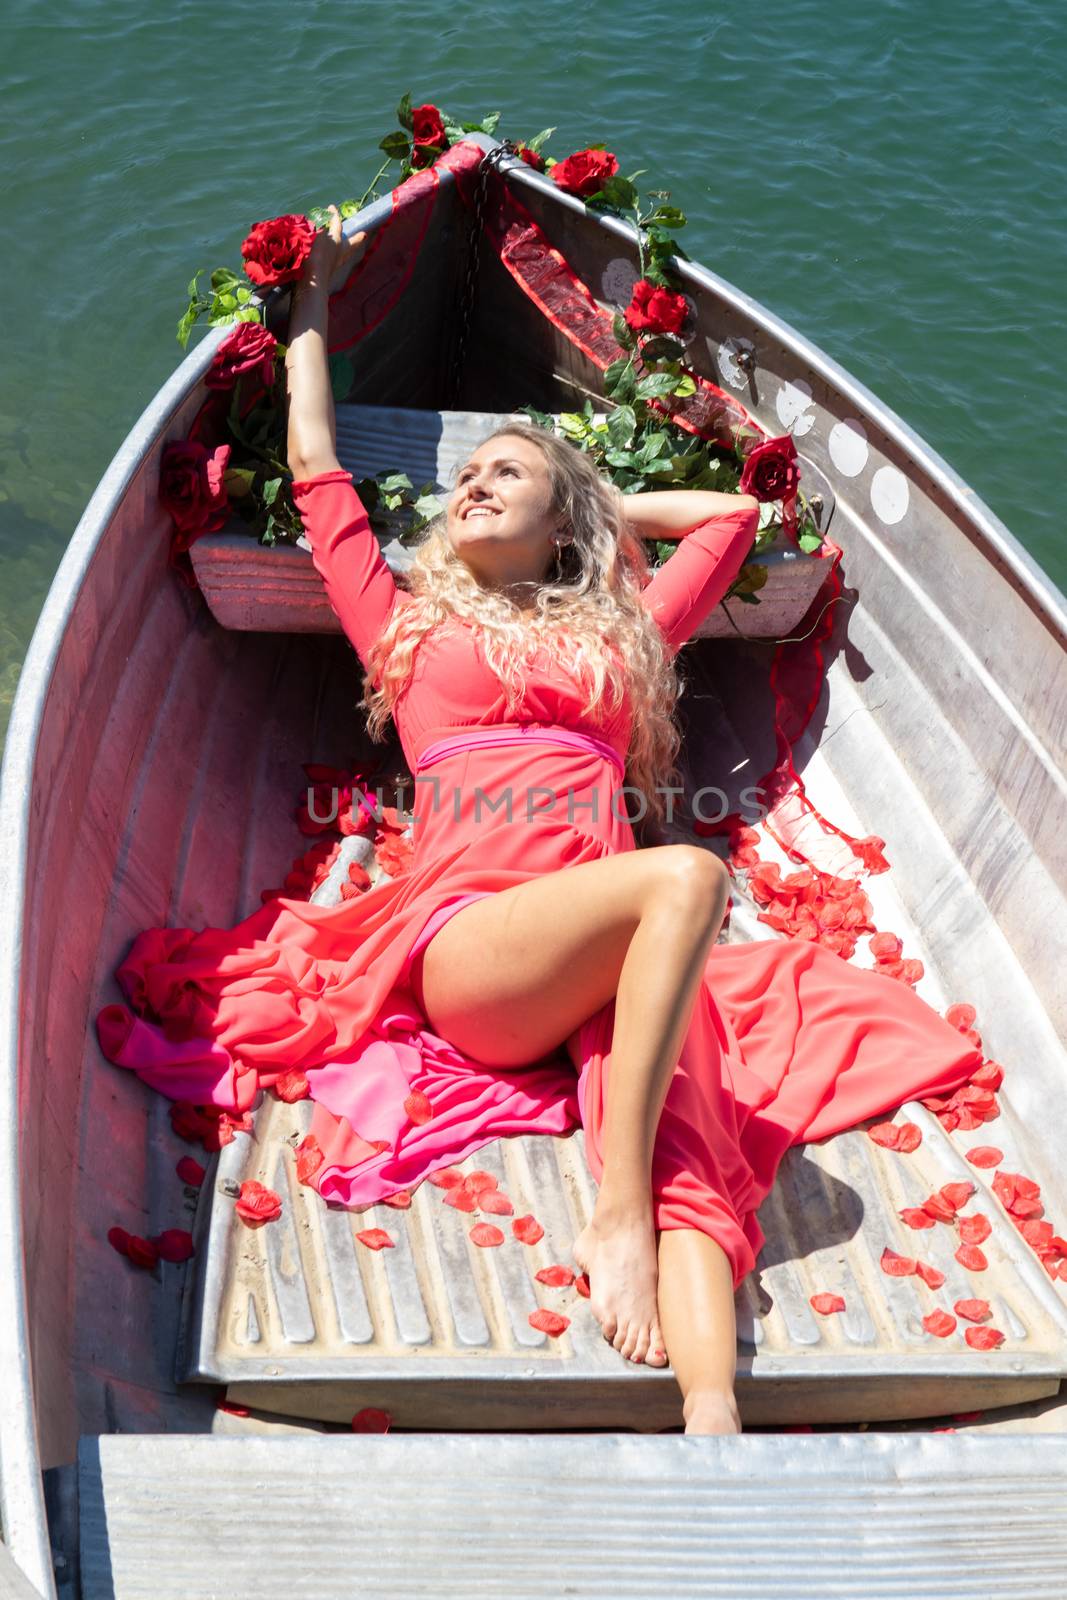 Life style woman with red dress and roses on a lake by PeterHofstetter